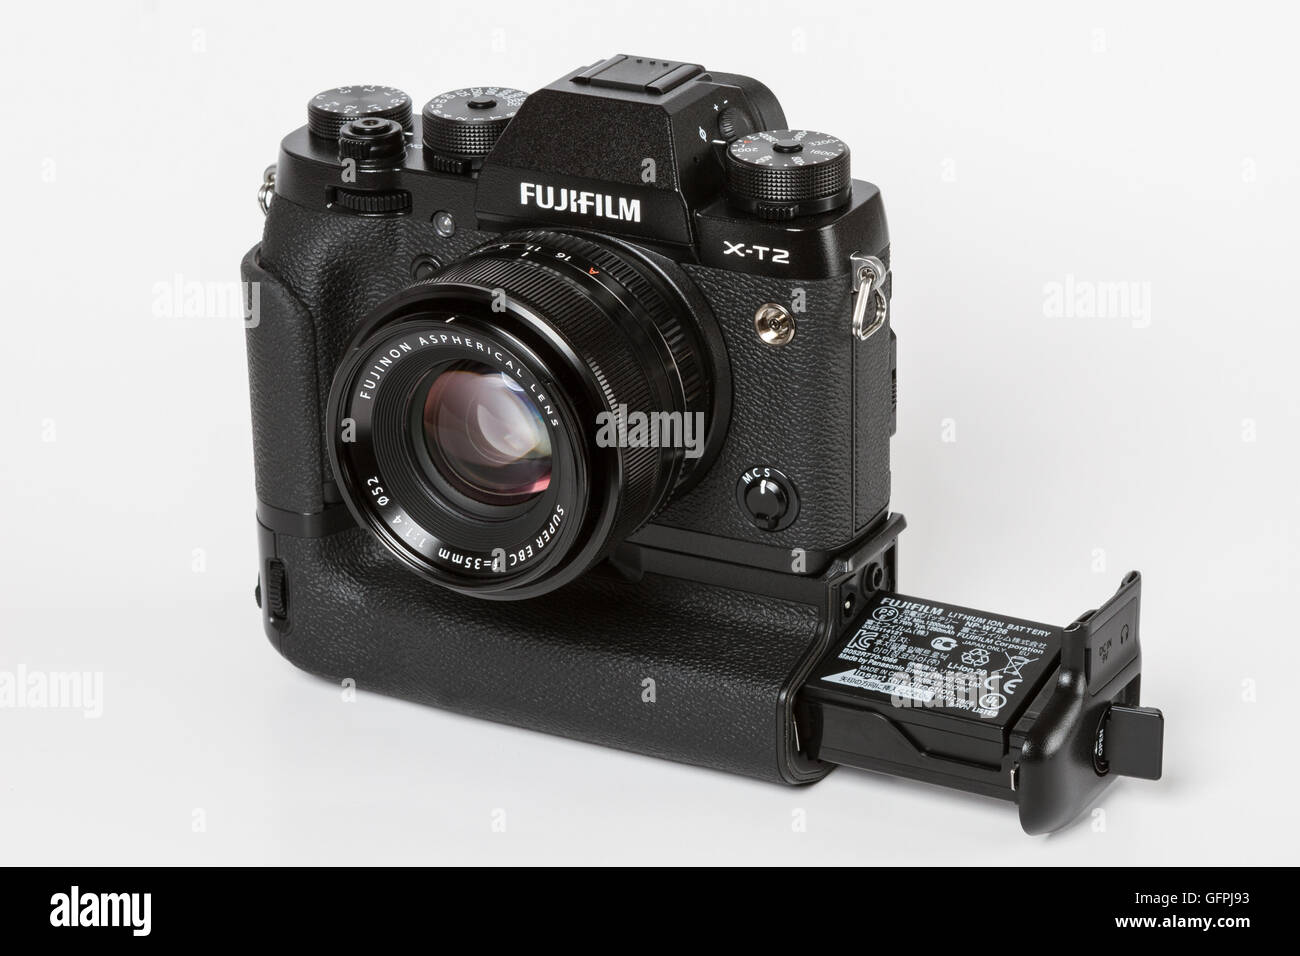 FUJIFILM X-T2, 24 megapixels, 4K video mirrorless camera With 35mm 1.4  FUJINON LENS and with an additional battery grip Stock Photo - Alamy